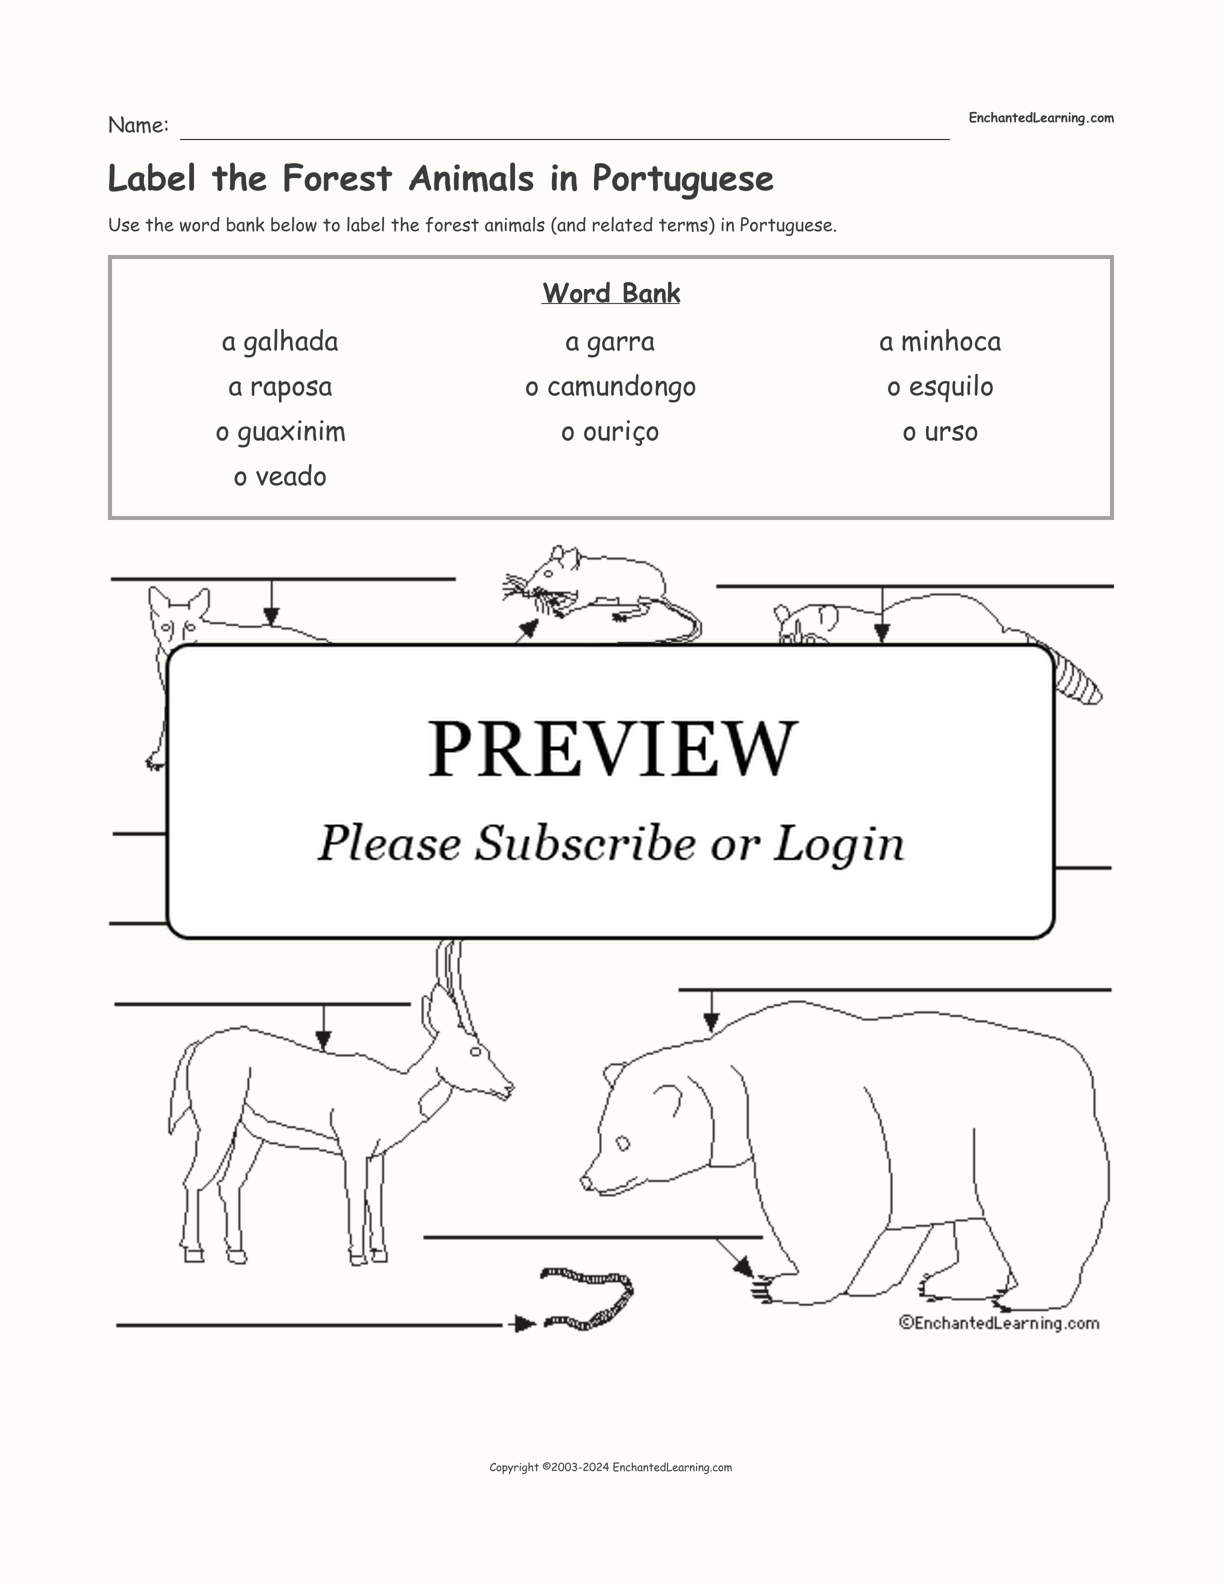 Label the Forest Animals in Portuguese interactive worksheet page 1